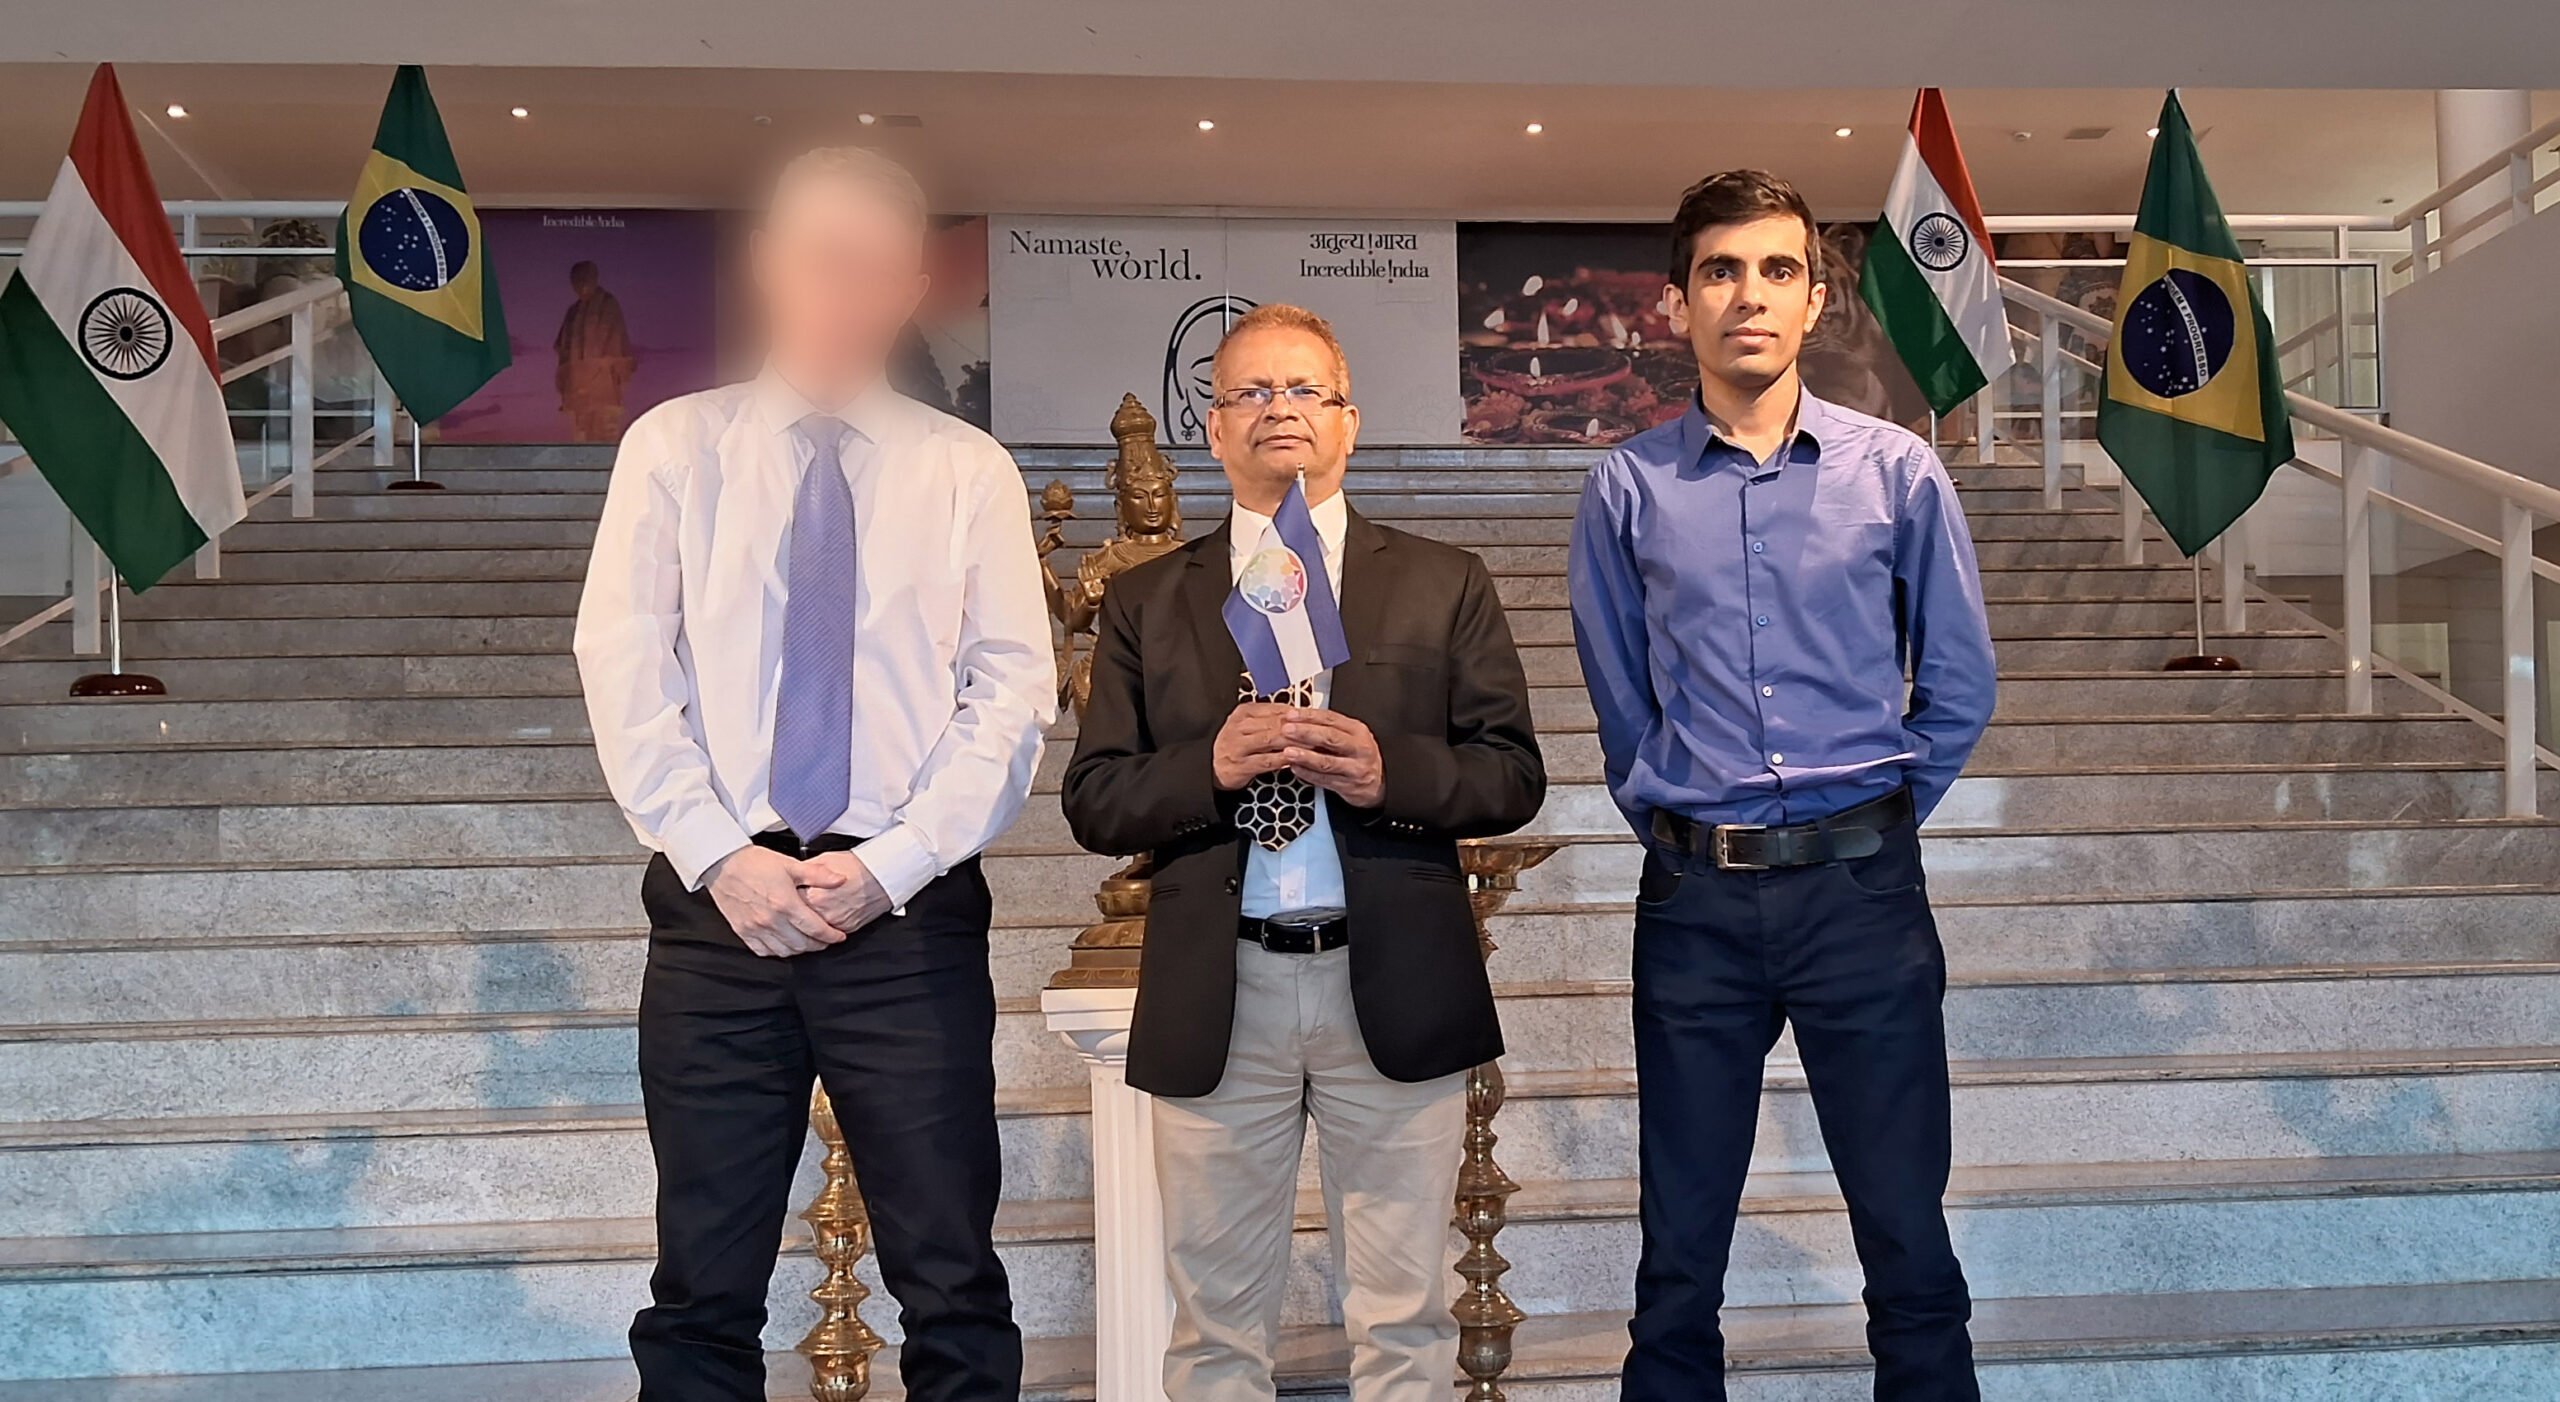 His Excellency the Deputy Ambassador of India in Brasilia, holding the Flag of Autistan in the Embassy of India. (On the left, the founder of the Autistan Diplomatic Organization (who does not wish to be publicly exposed), and on the right, his assistant.)